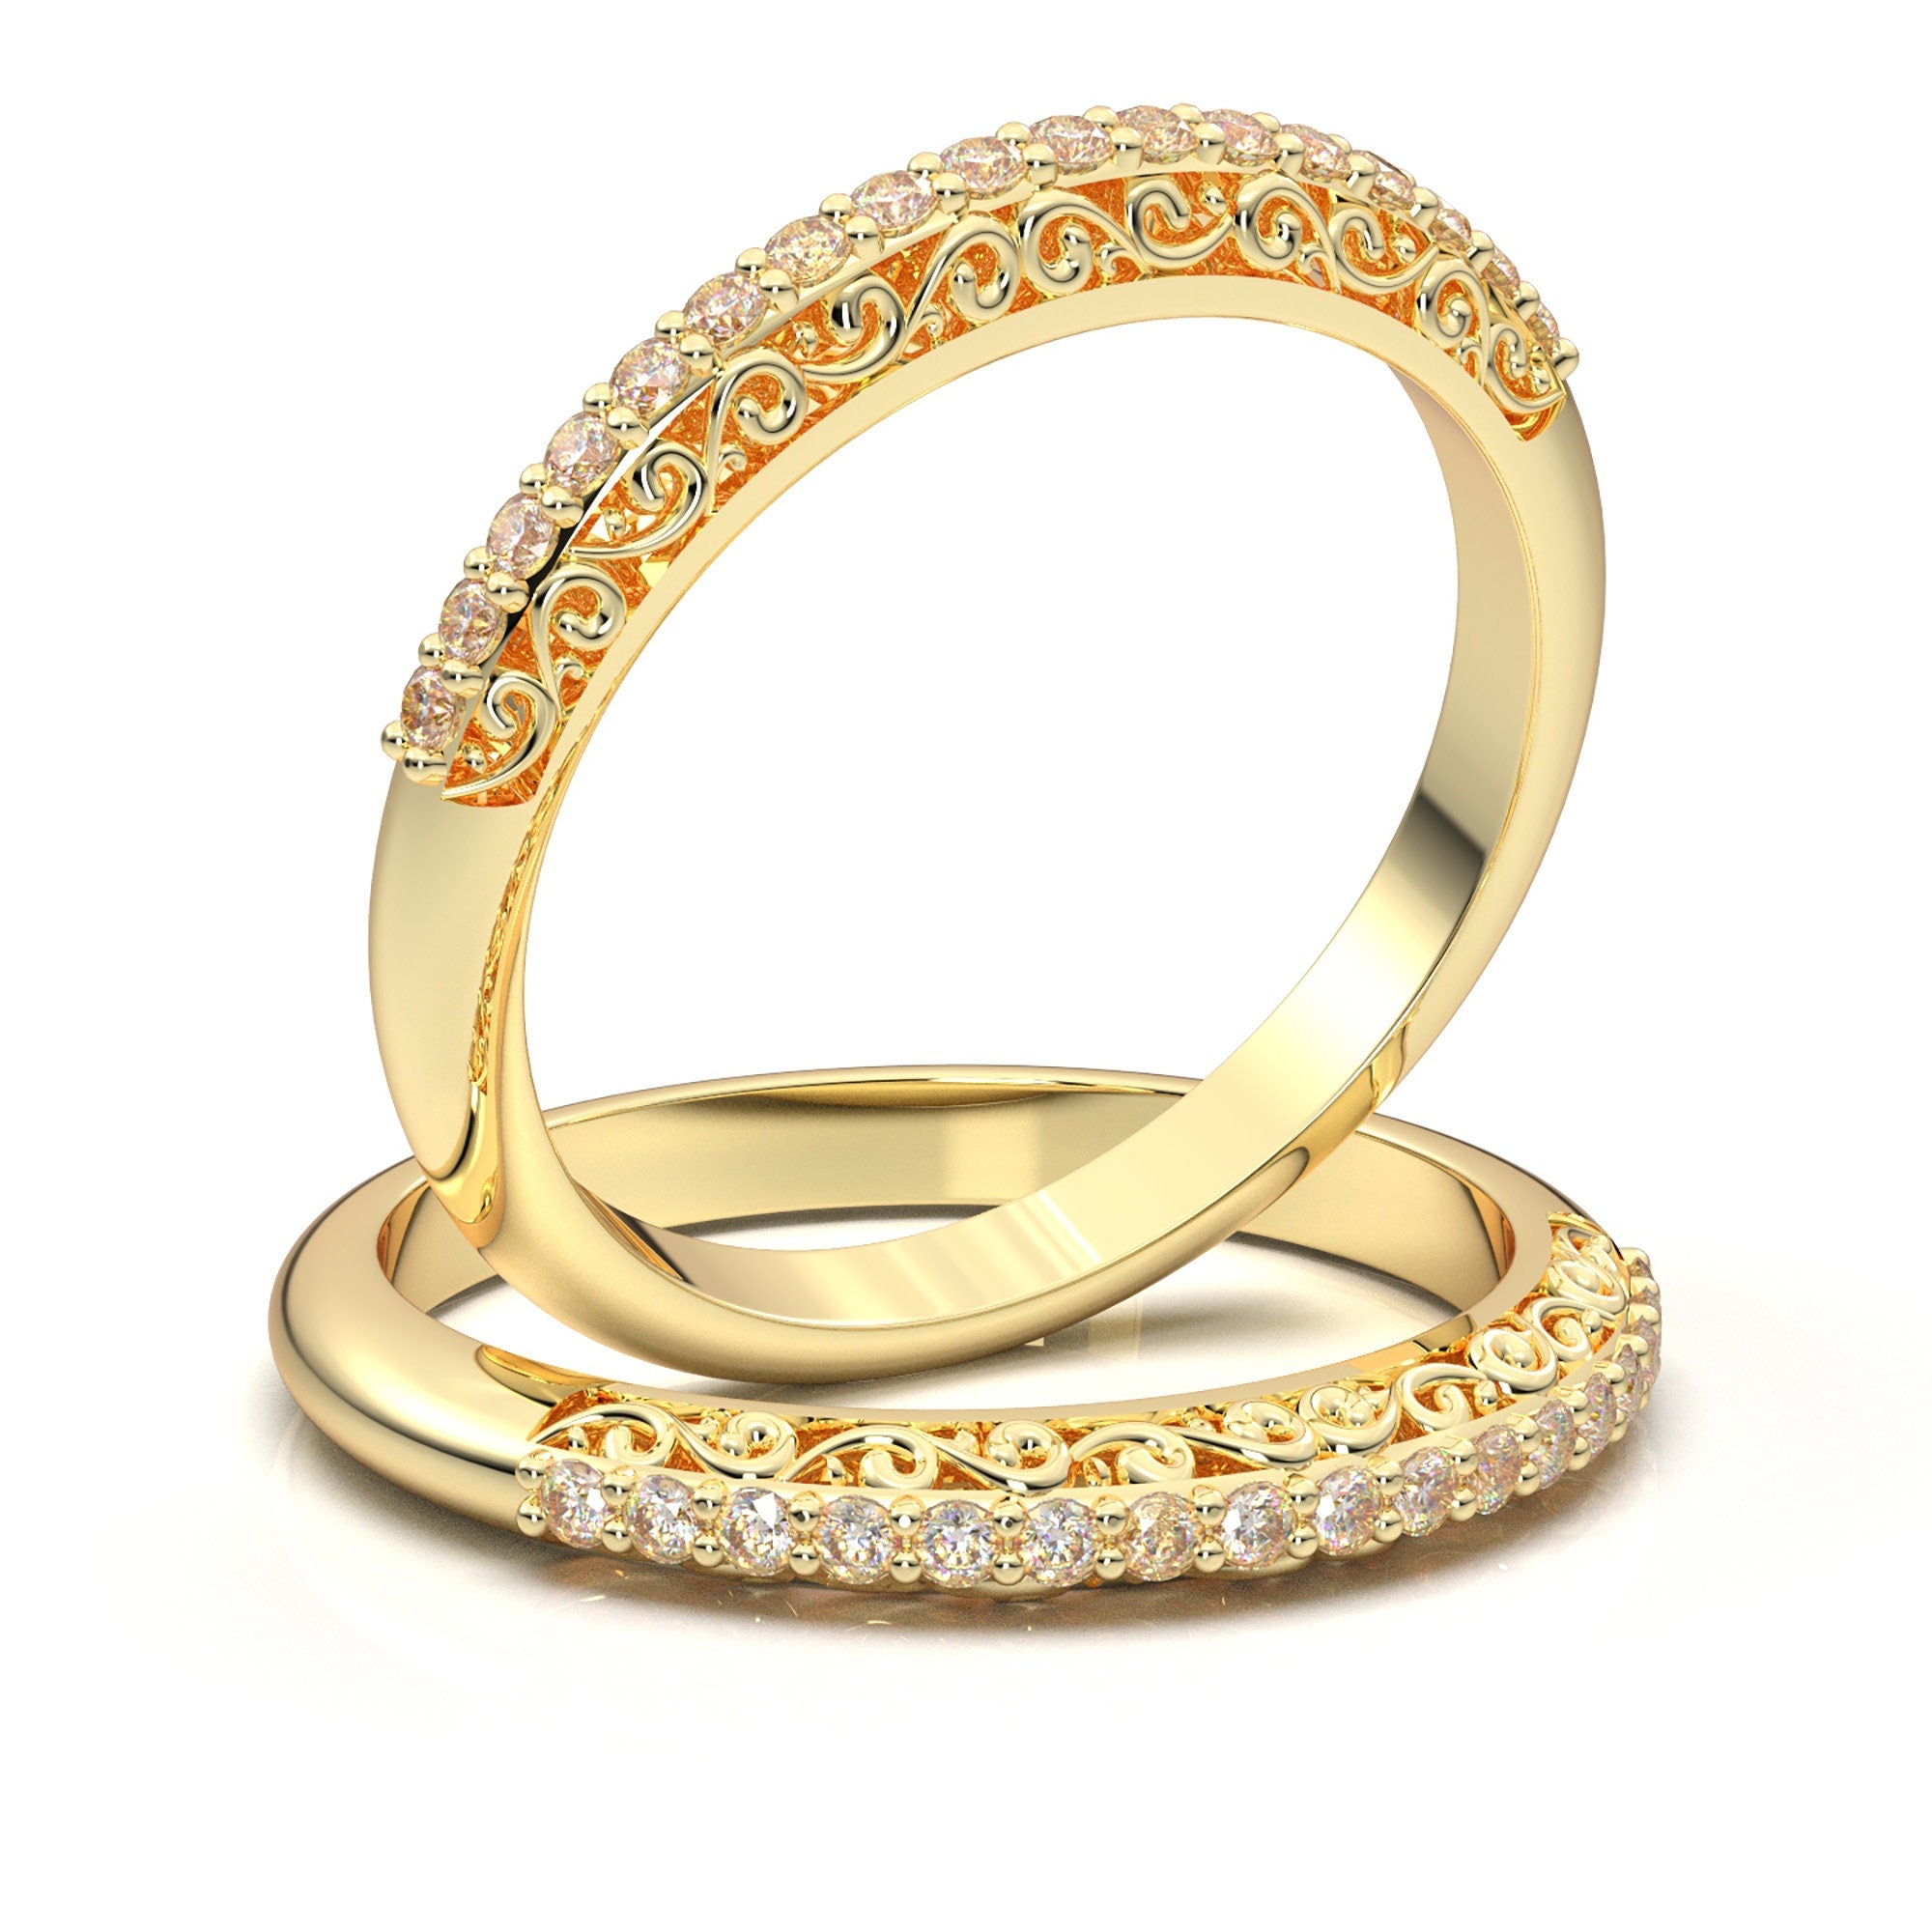 Gold Wedding Bands, Engagement Rings | Jewelry by Johan - Jewelry by Johan